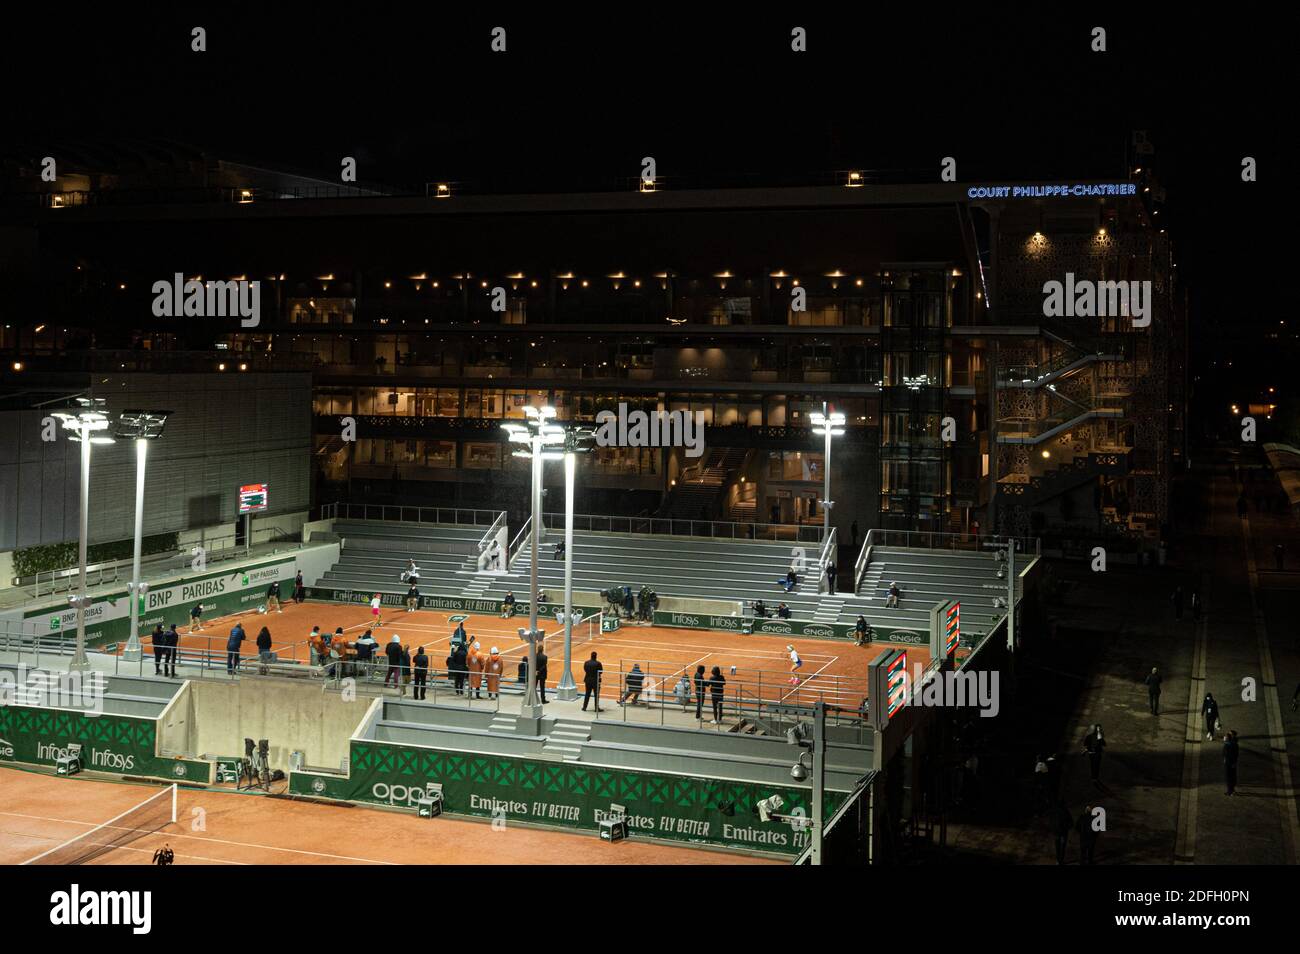 A general view of Roland Garros stadium as the French tennis open has  started on September 27, 2020 in Paris, France. French Open organisers  initially unveiled ambitious plans to allow fans into